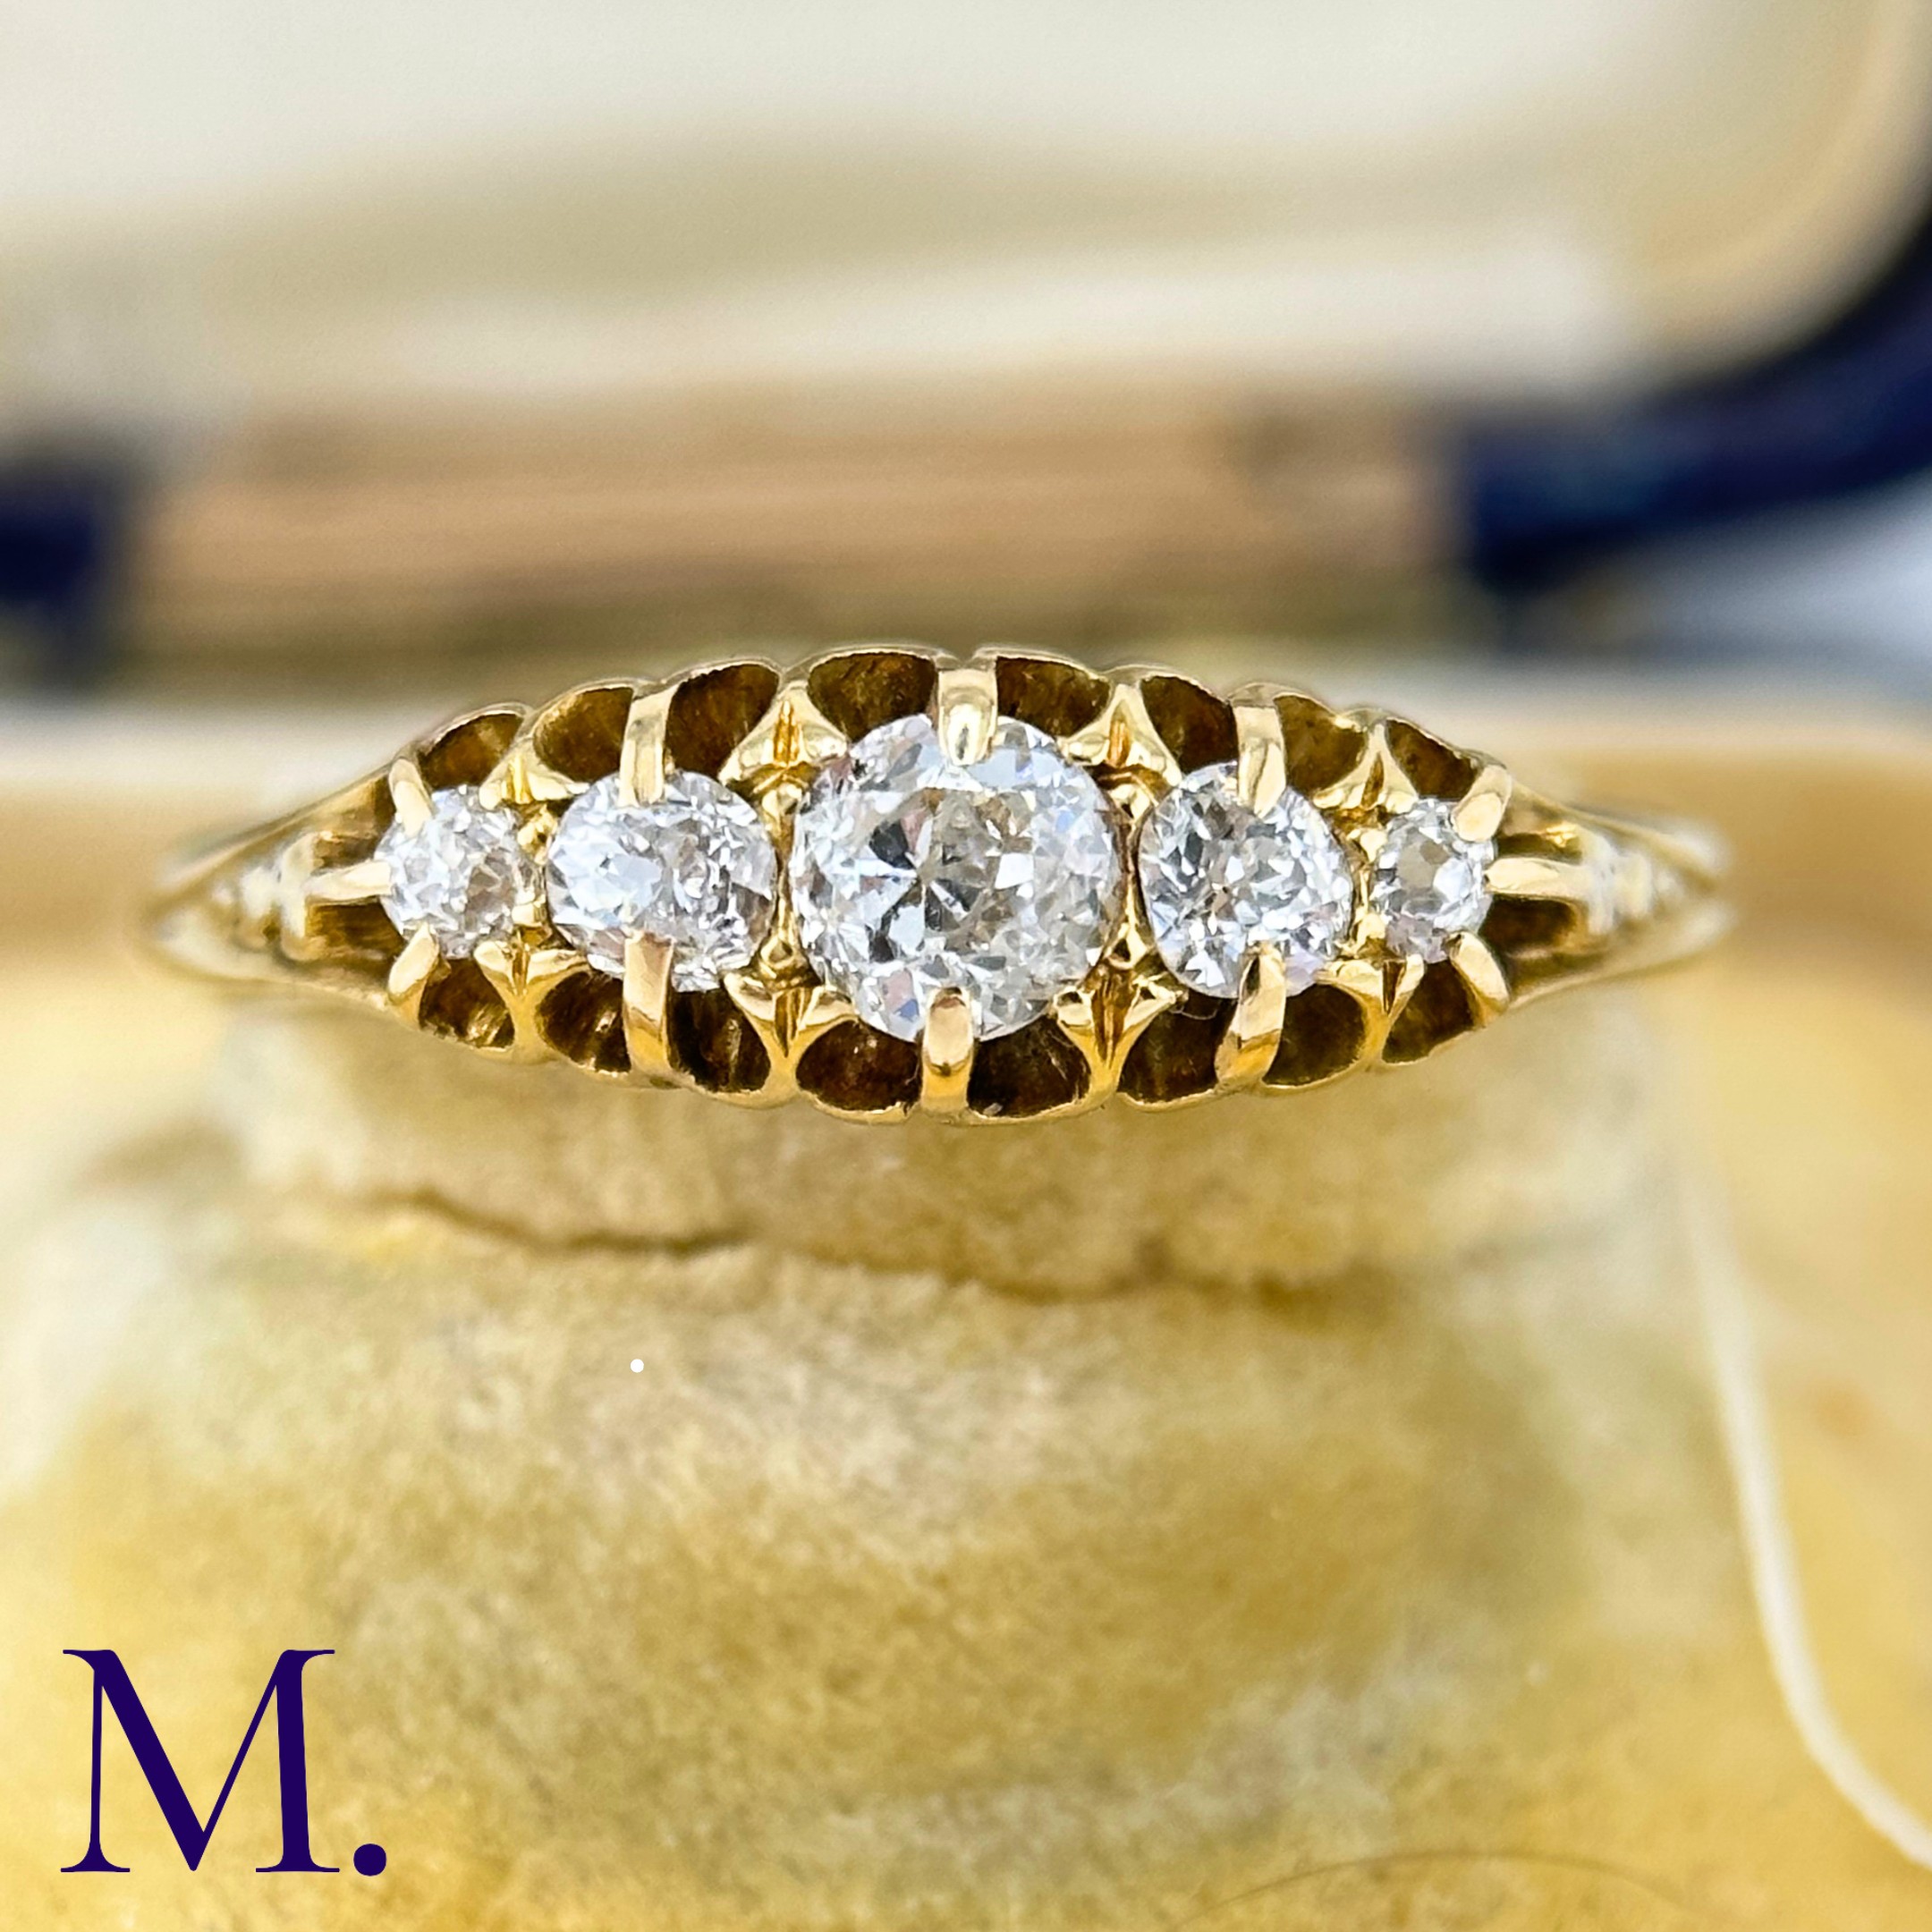 An Antique 5-Stone Diamond Ring The 18ct yellow gold band is set with five bright old cut